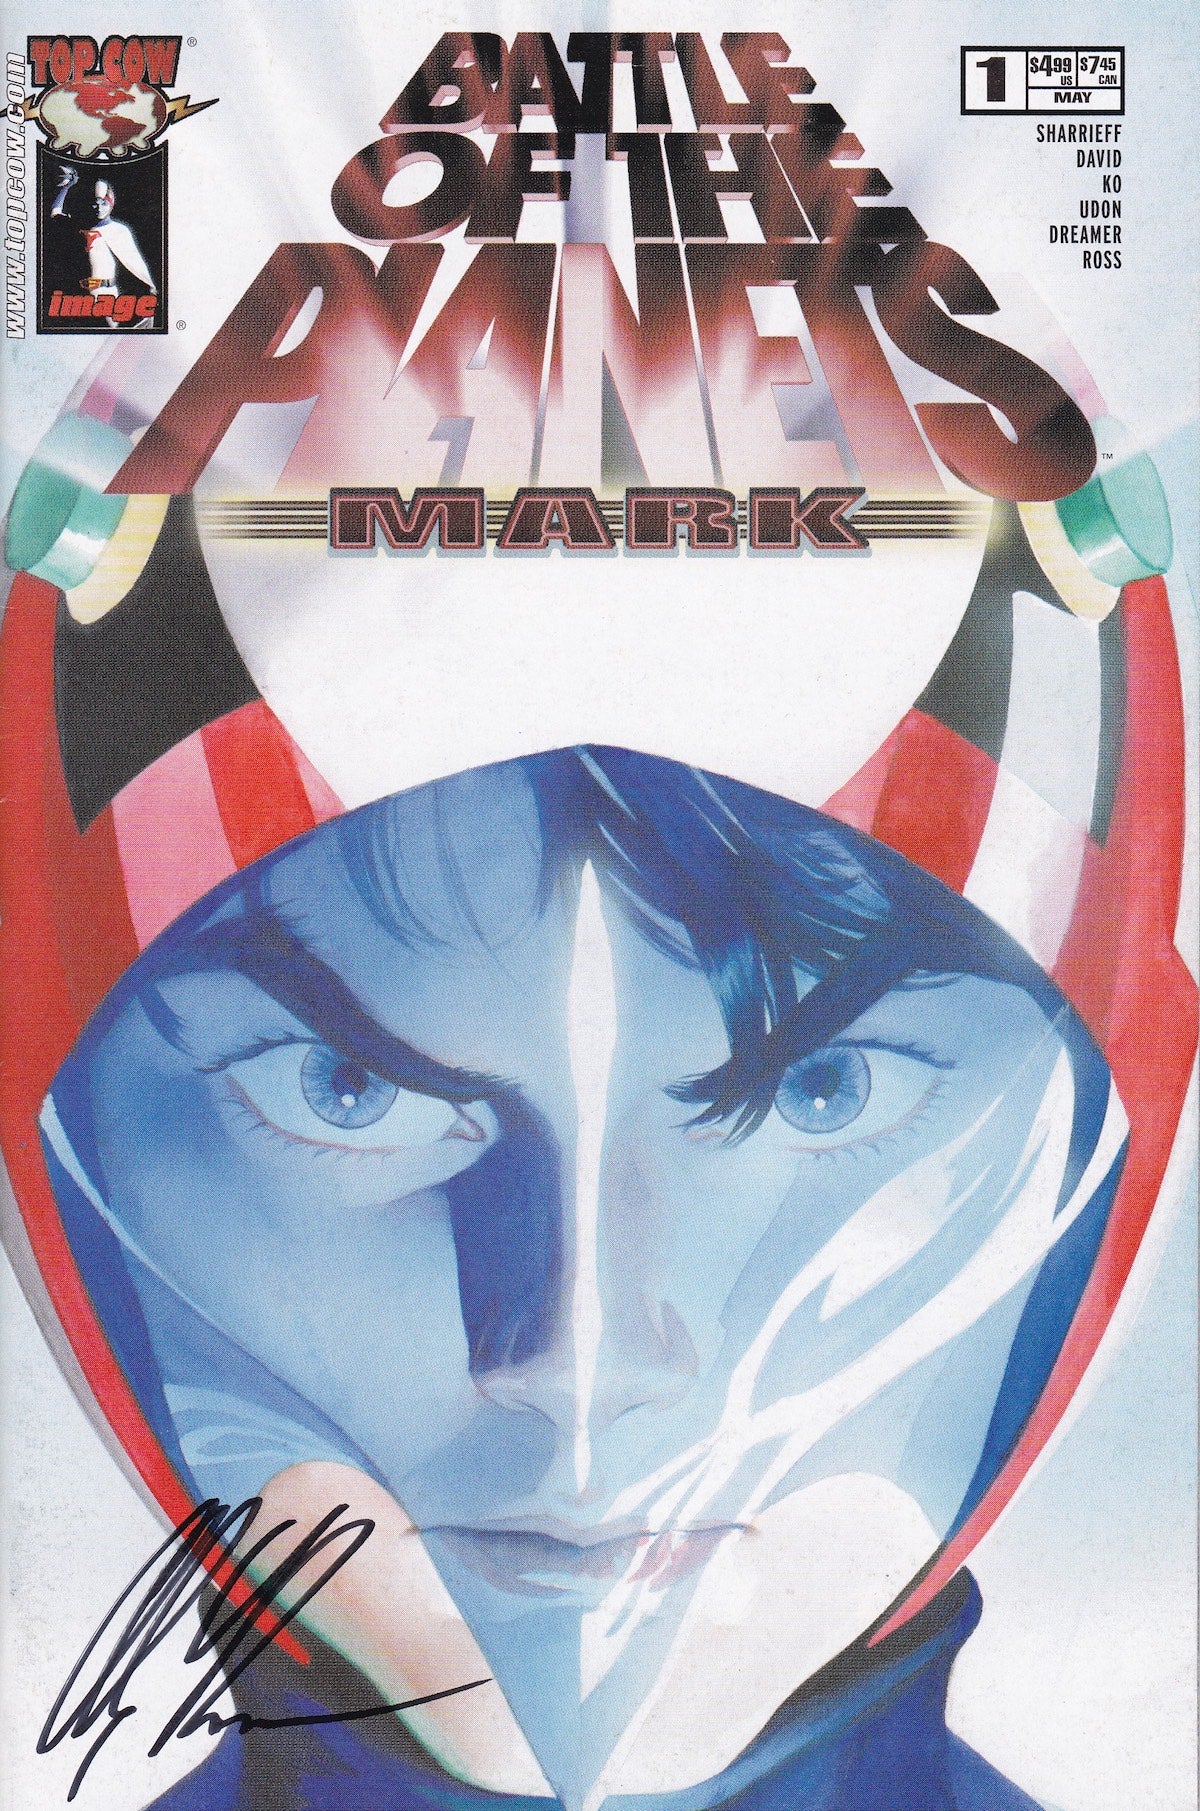 Battle of the Planets Mark Special – Alex Ross Art